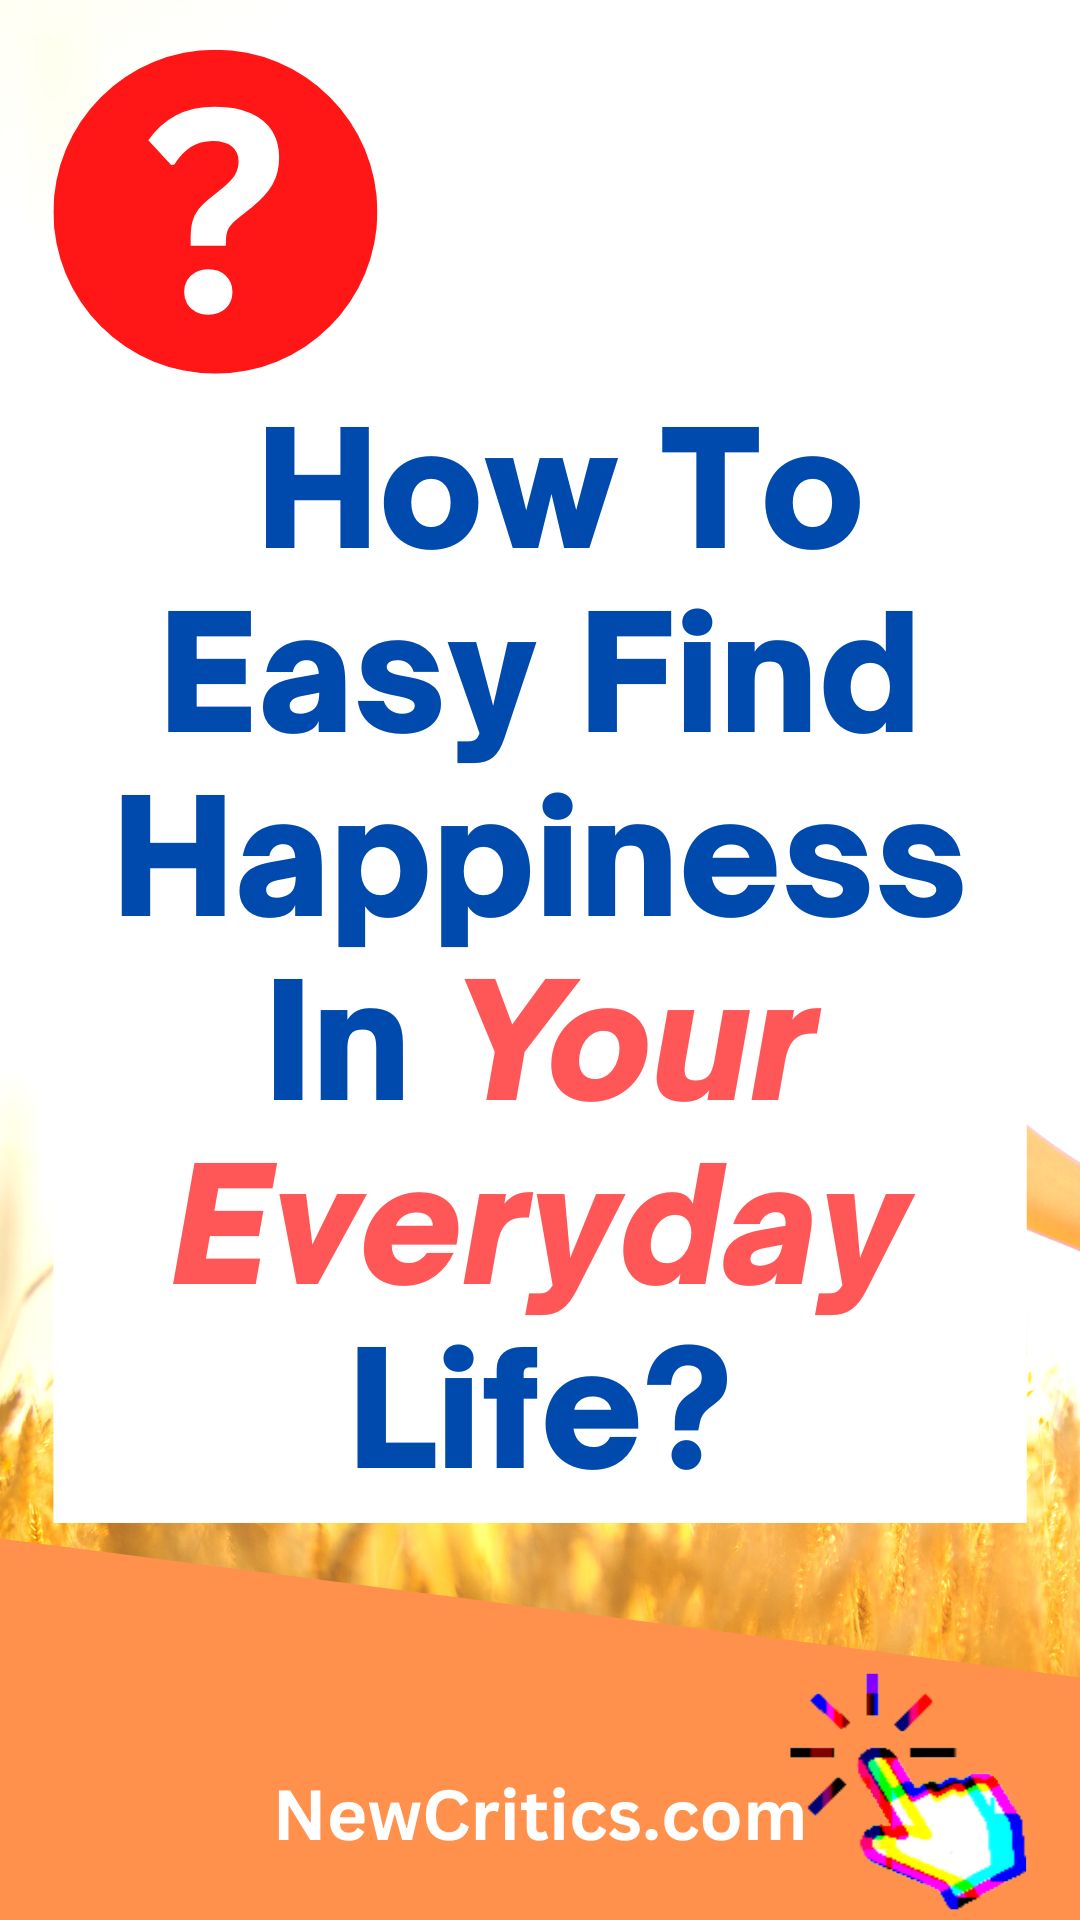 How To Easy Find Happiness In Your Everyday Life / Canva